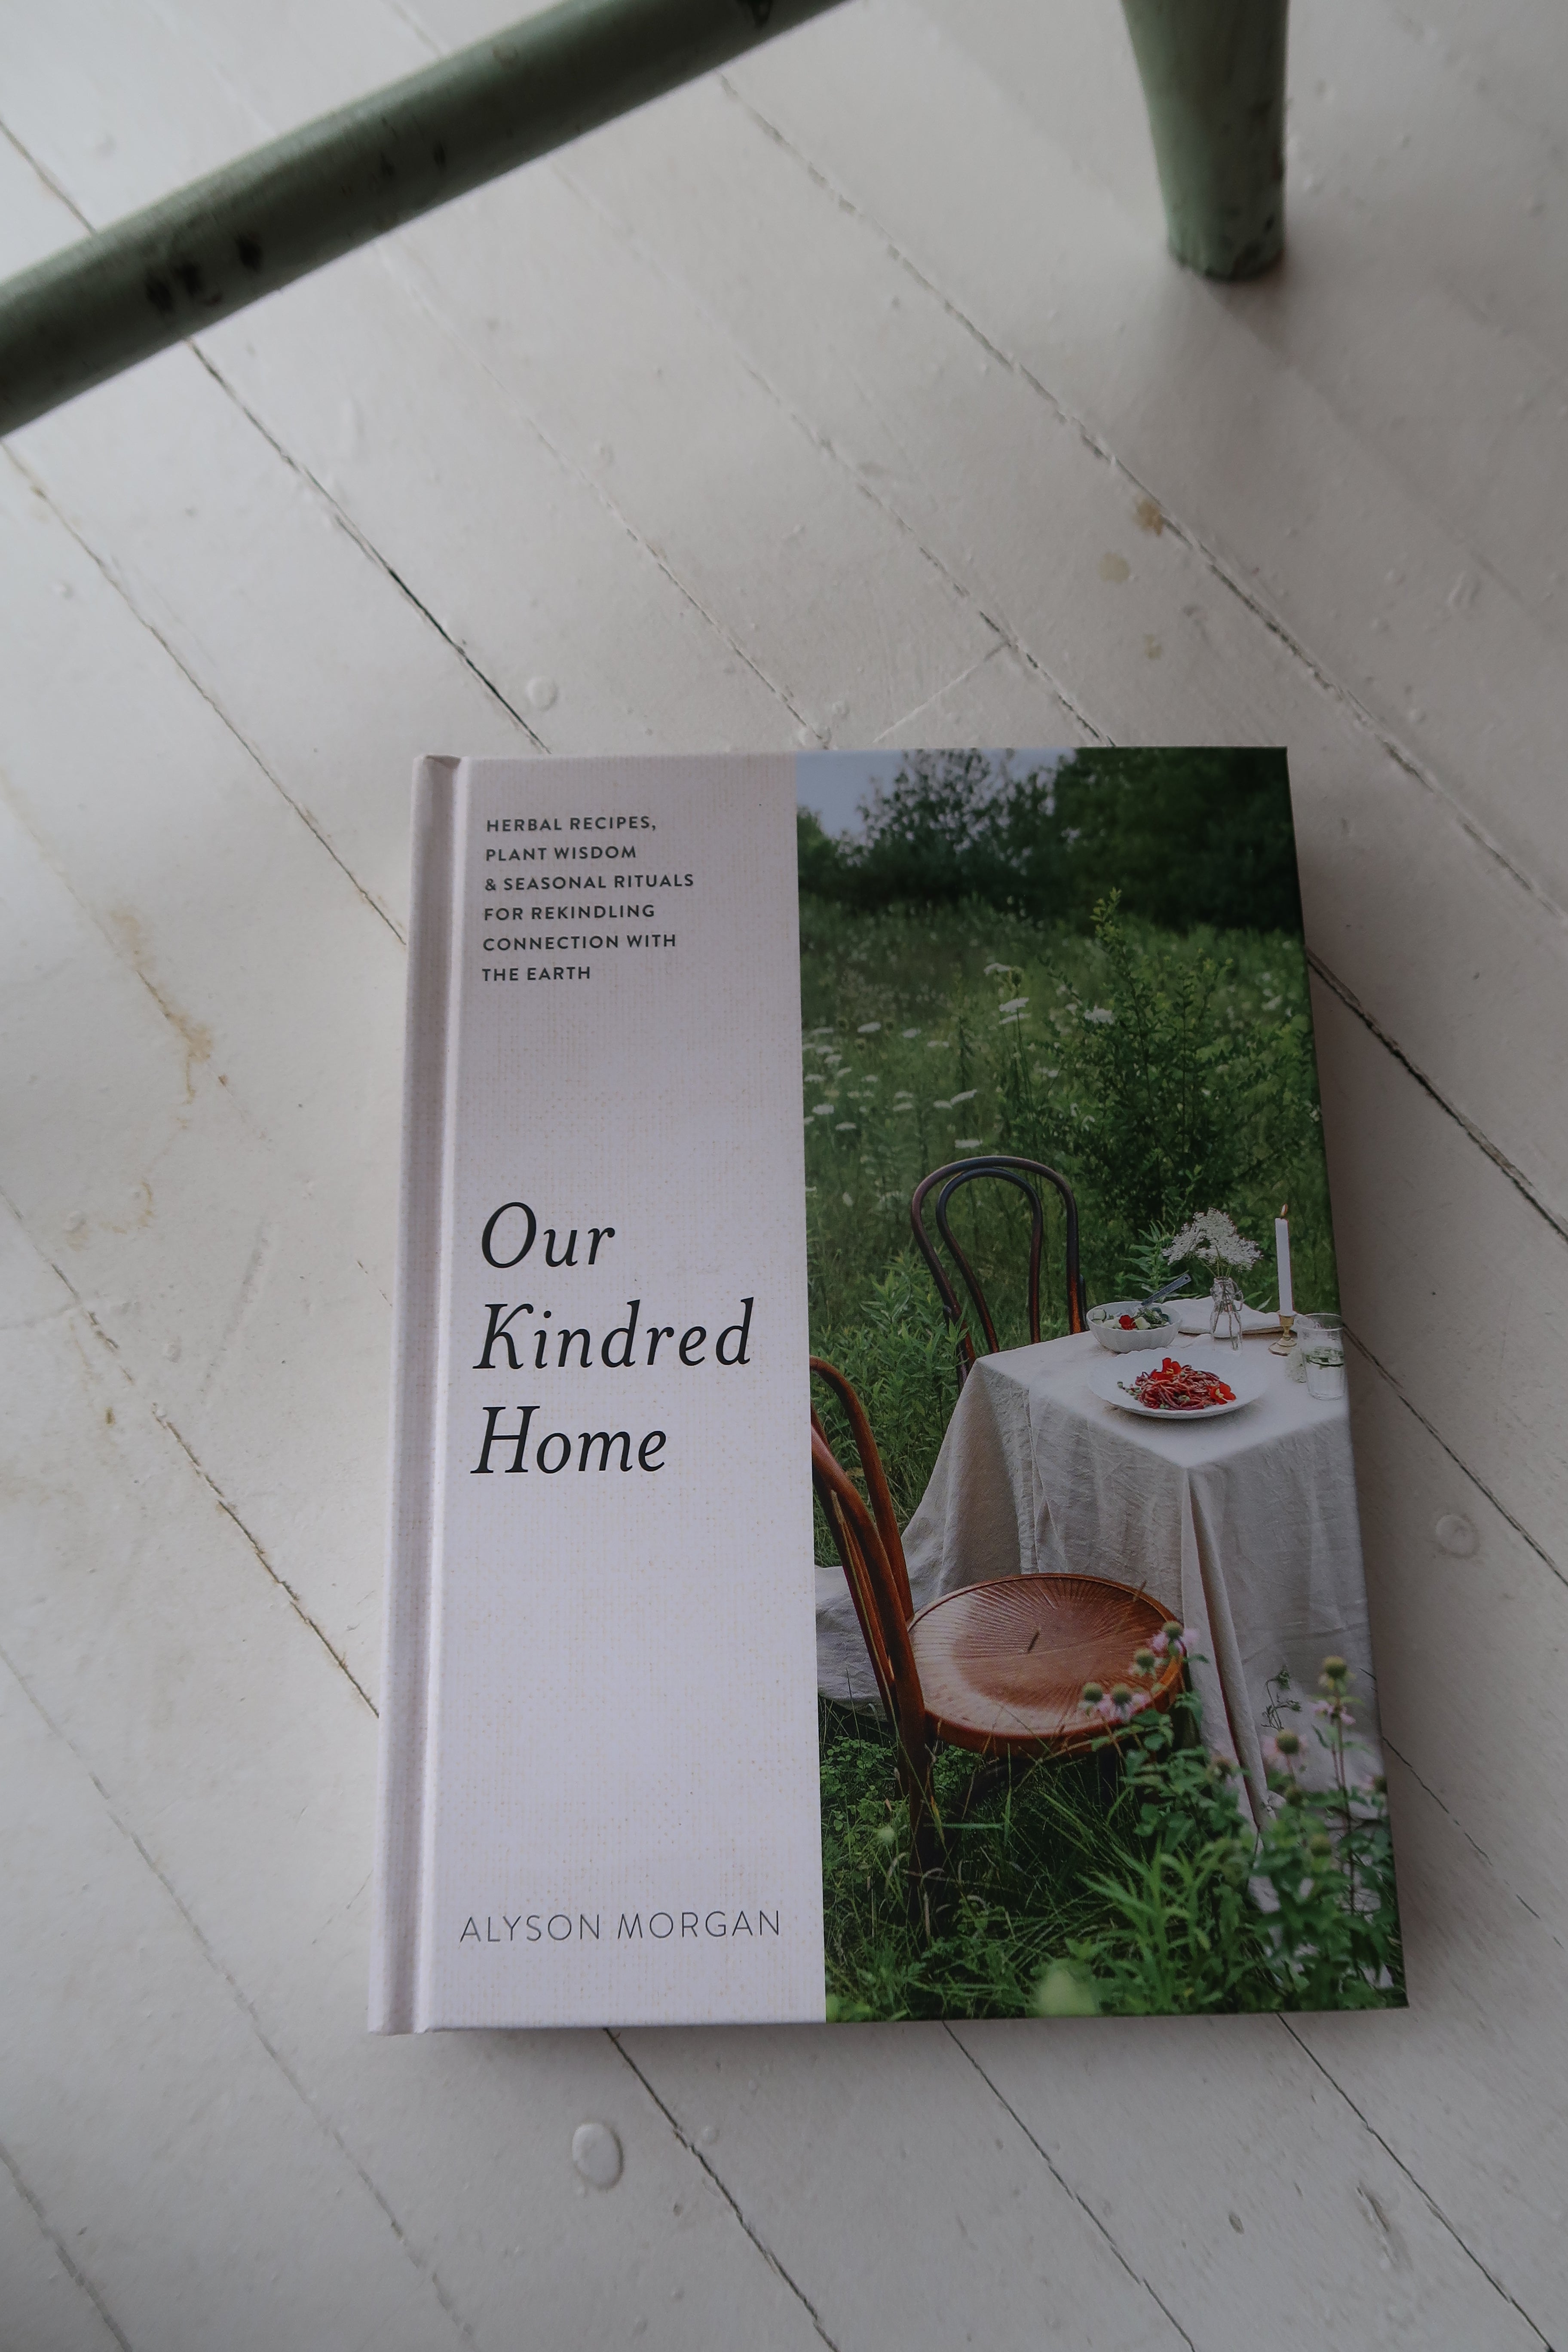 Our Kindred Home: Herbal Recipes, Plant Wisdom, and Seasonal Rituals for Rekindling Connection with the Earth